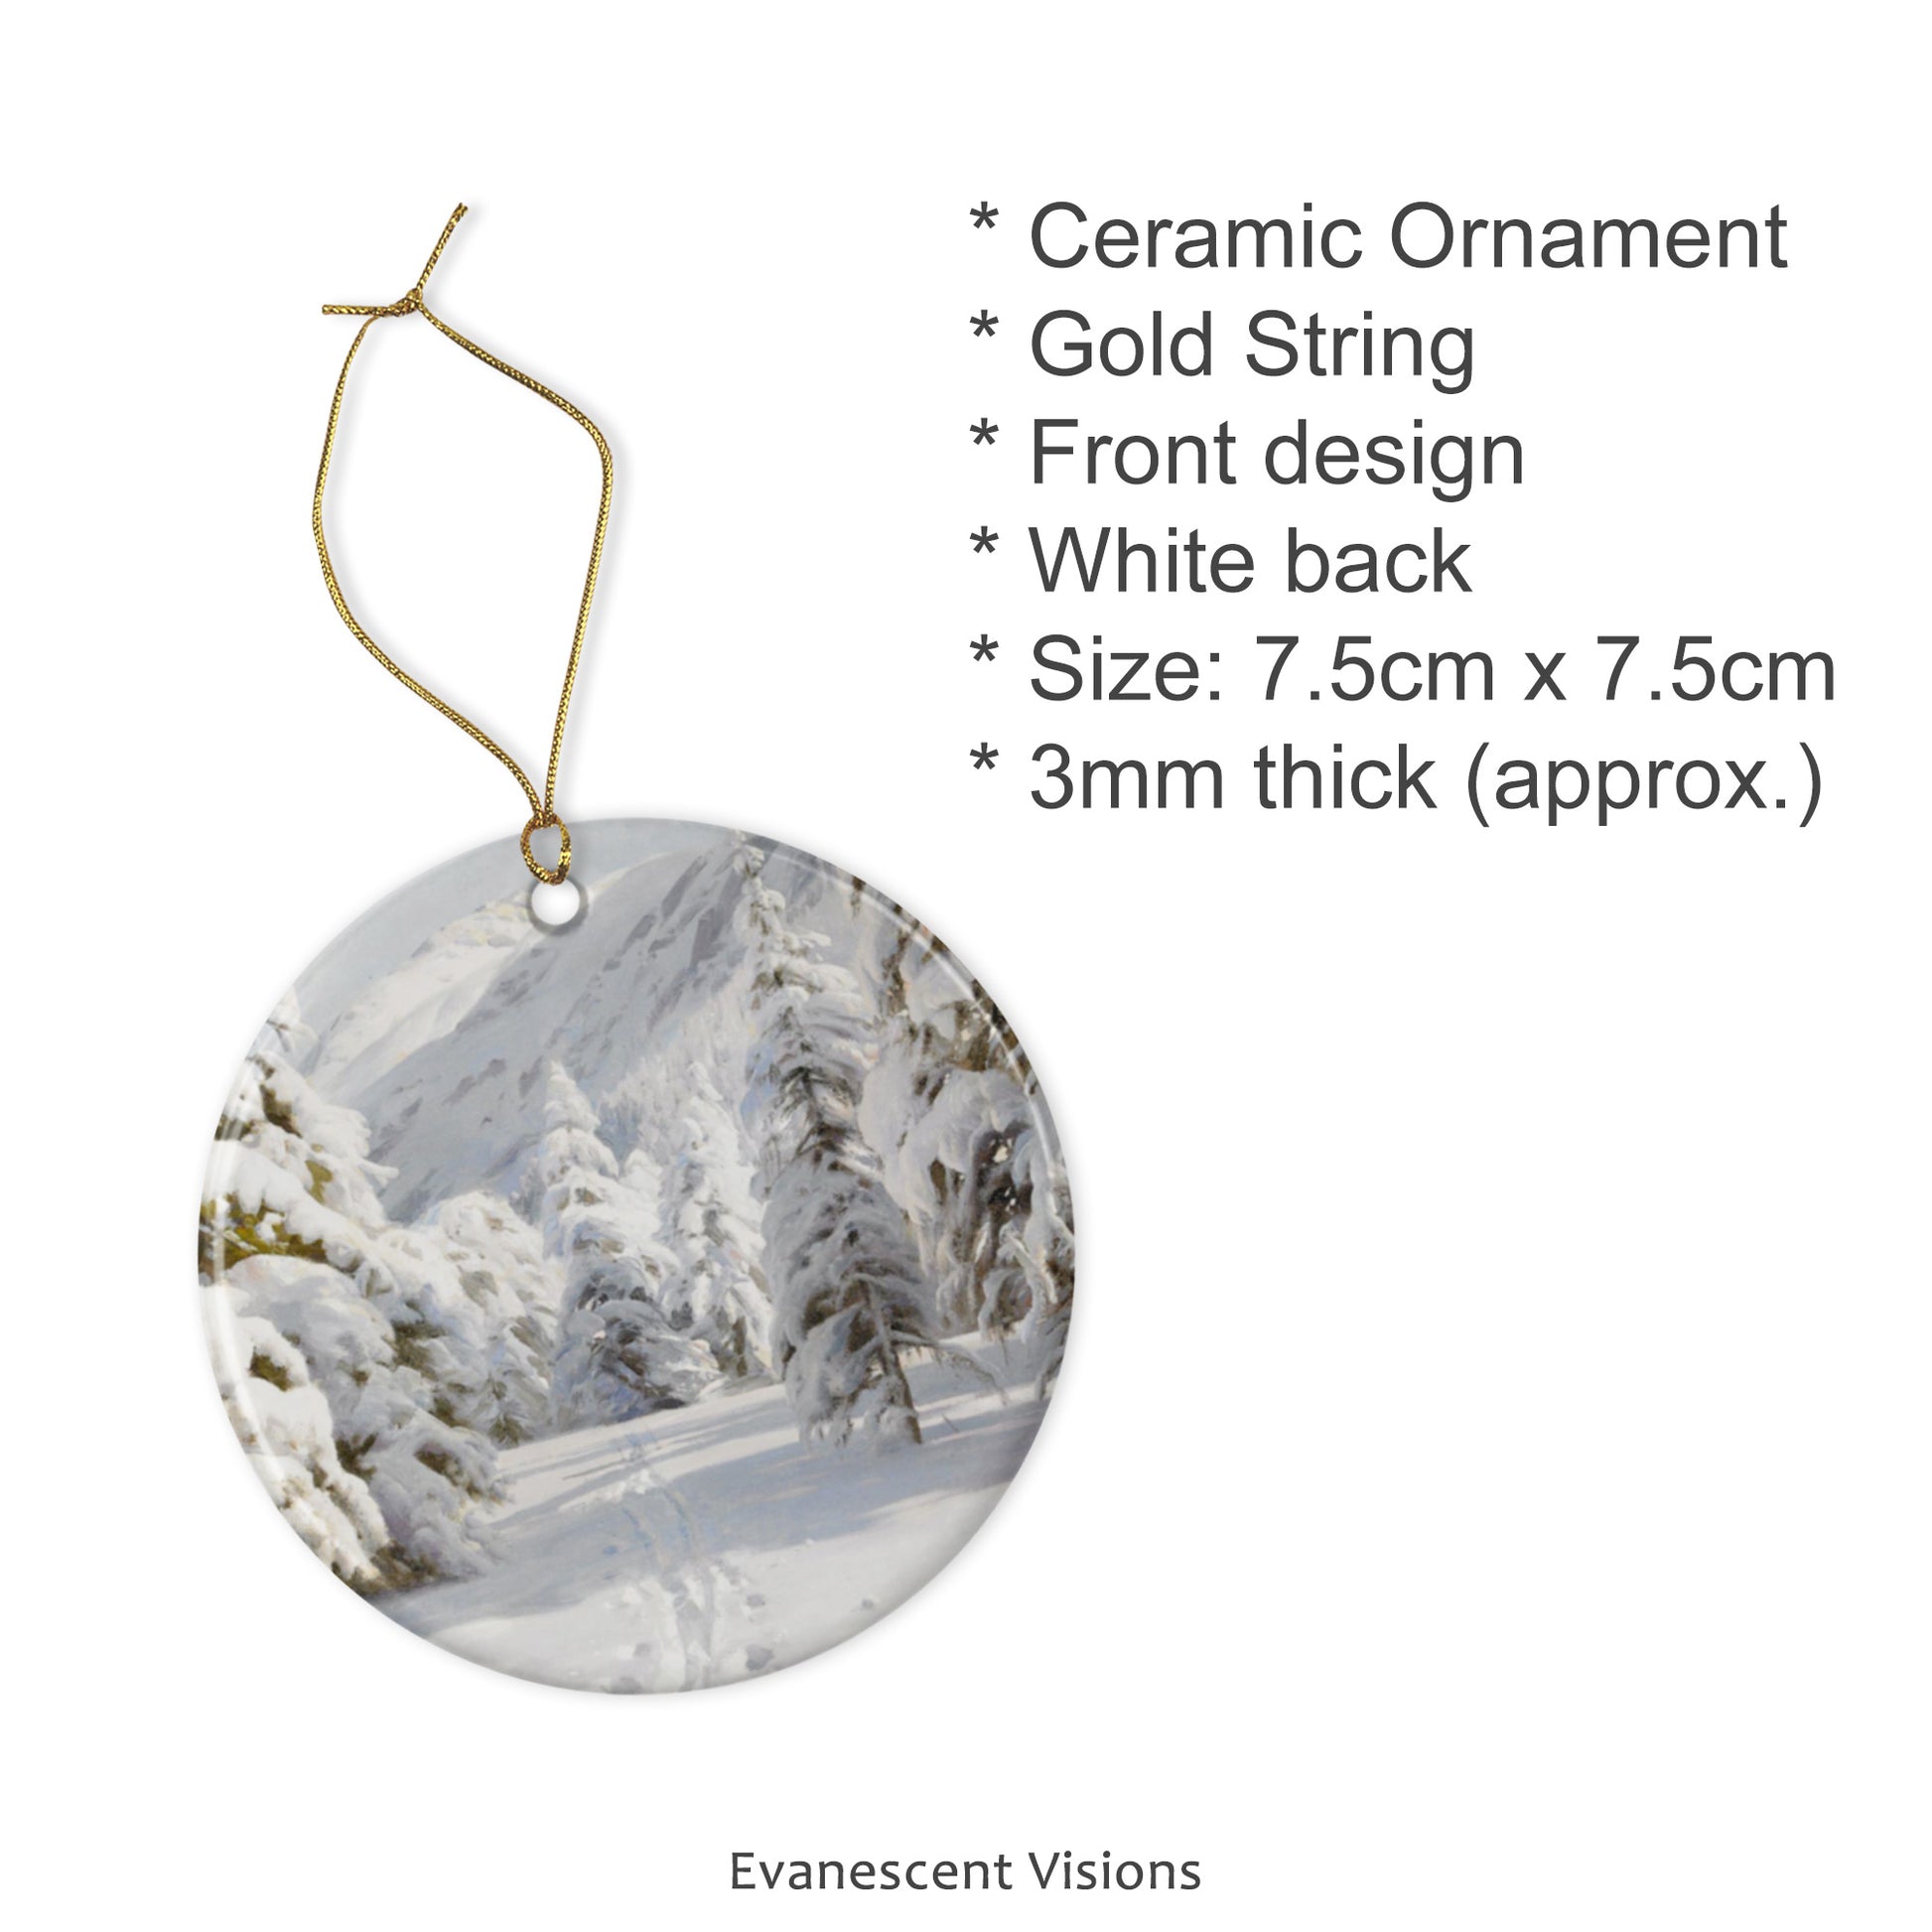 Product details for the Winter Landscapes ceramic Christmas ornament